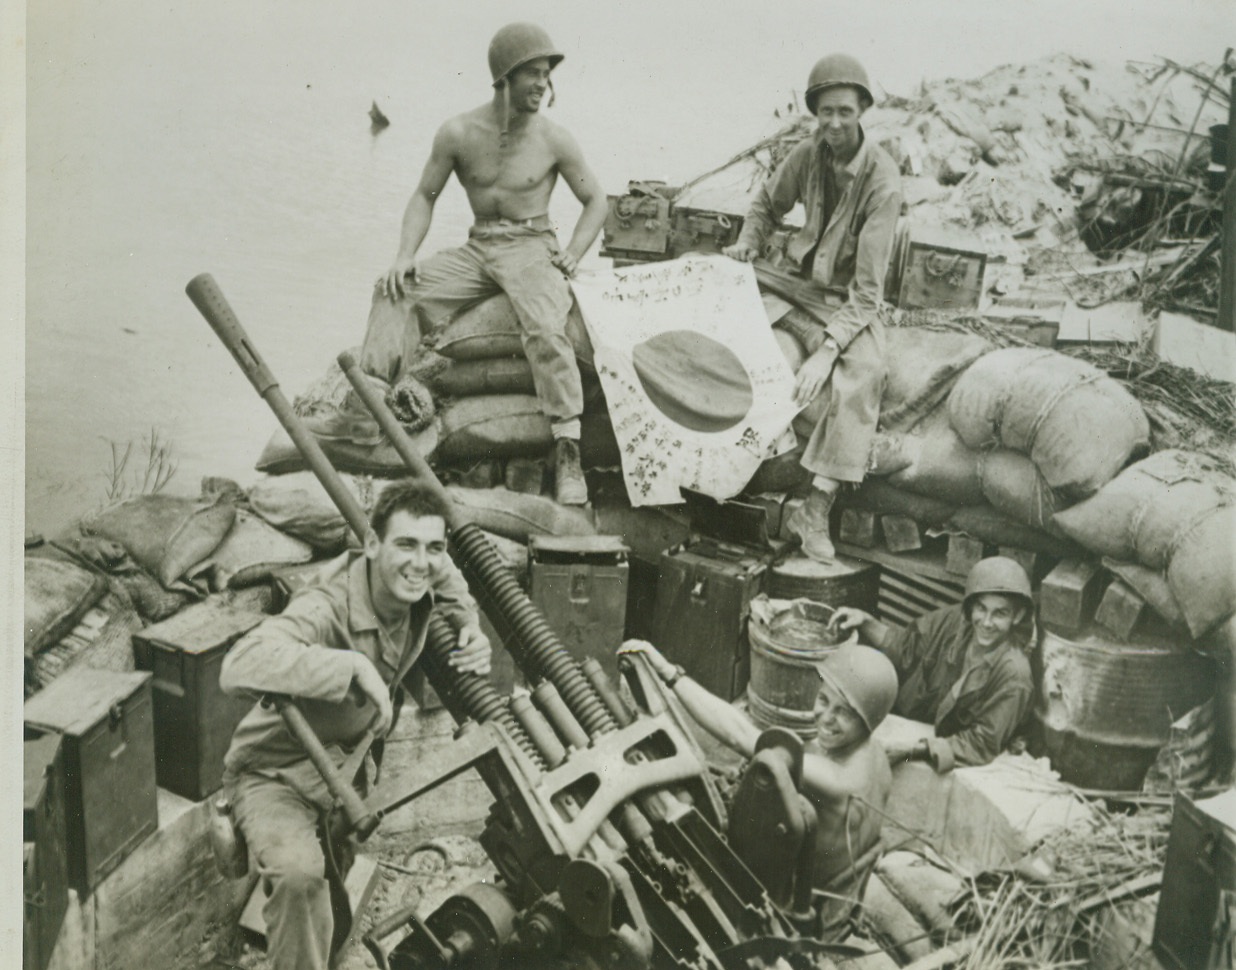 Jap Gun on Guam a Yank Prize, 8/2/1944. GUAM -- Useless now except as a memento of action gone by is this captured Jap gun taken during the American assault of Piti, Jap Naval station at Guam. In the gun pit are Sgt. Joe A. Grimes, Groesbeck, Tex. (rear, left) and Cpl. James W. Redding, (rear, right), Atlanta, Ga., examining a Jap flag, while (left to right, front) Pfc. Joe Woolsey, Jerseyville, Ill.; Pfc. Warren Jordan, Newark, N.J.; and Pfc. Joe Gilles, LaCrosse Wis., exhibit the gun. Credit- WP-(ACME);